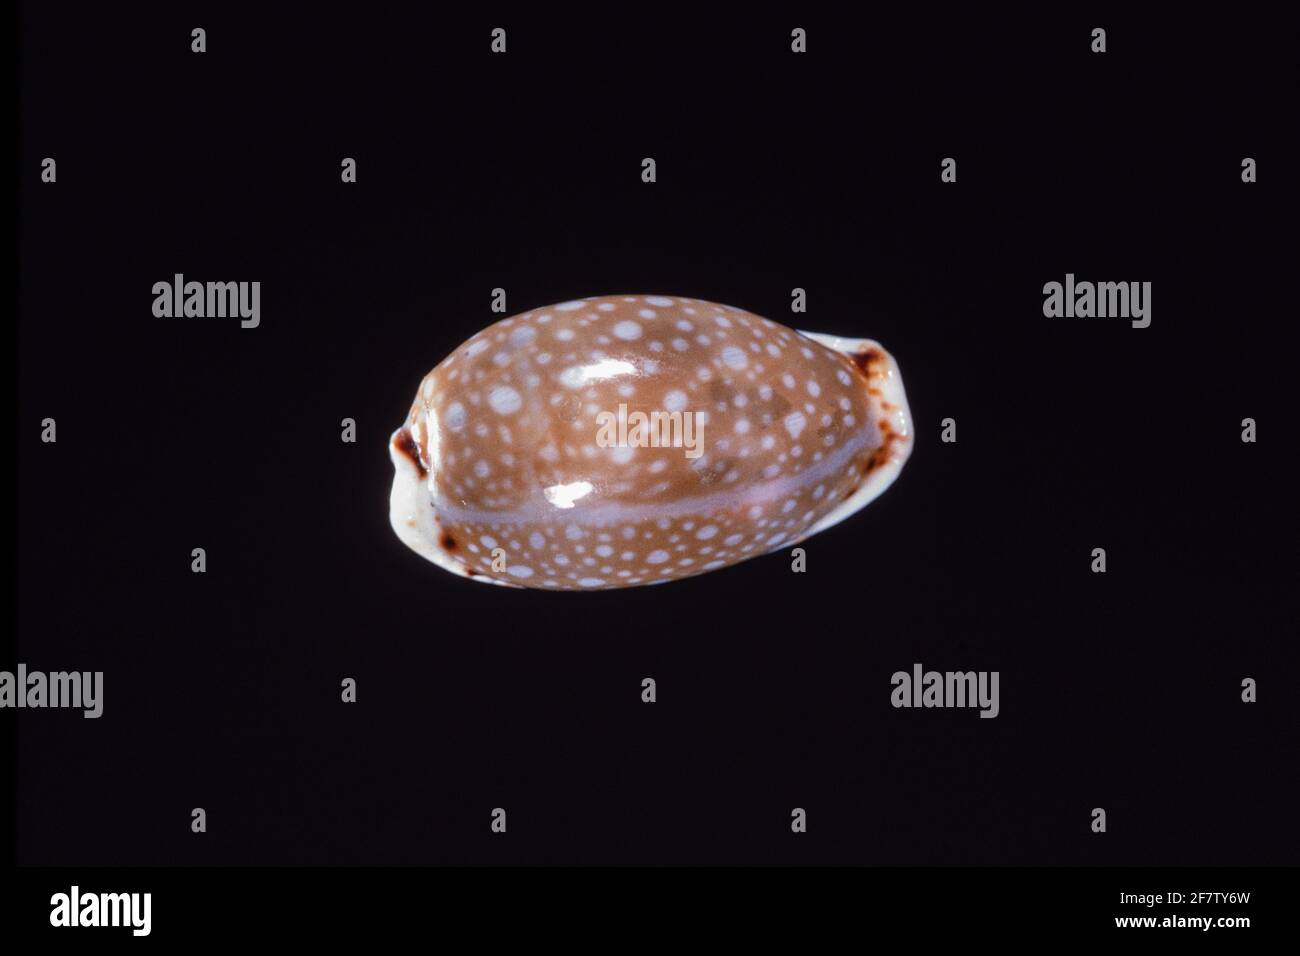 Yellow-tinted Cowry, Naria labrolineata, a sea snail found in the Indo-Pacific from East Africa to Hawaii. Stock Photo